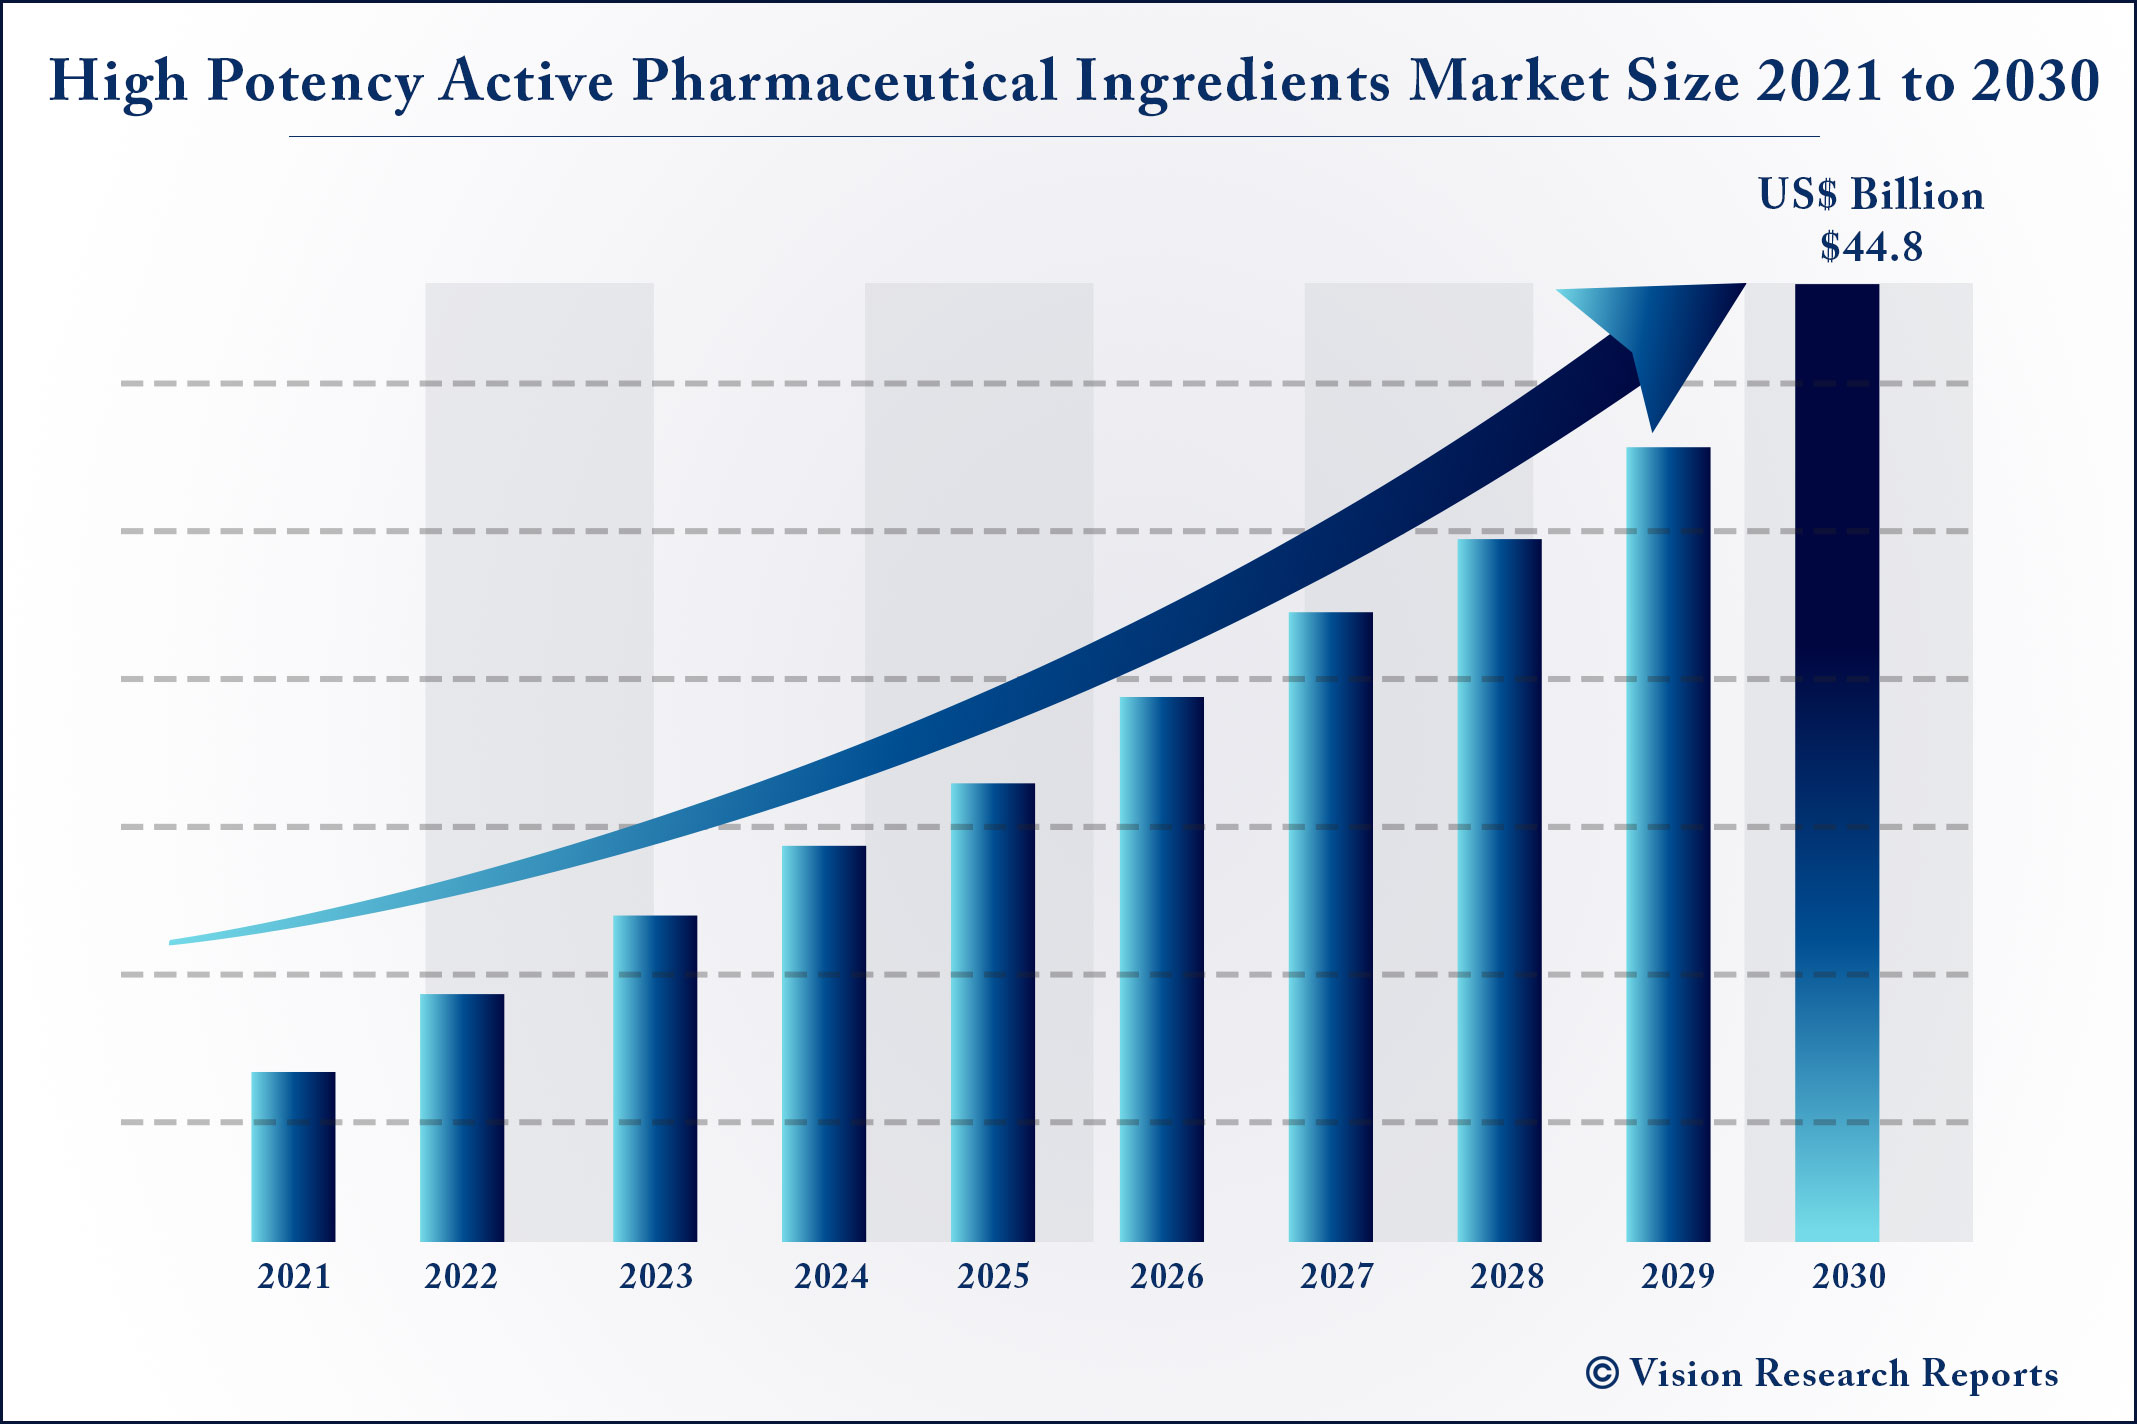 High Potency Active Pharmaceutical Ingredients Market Size 2021 to 2030